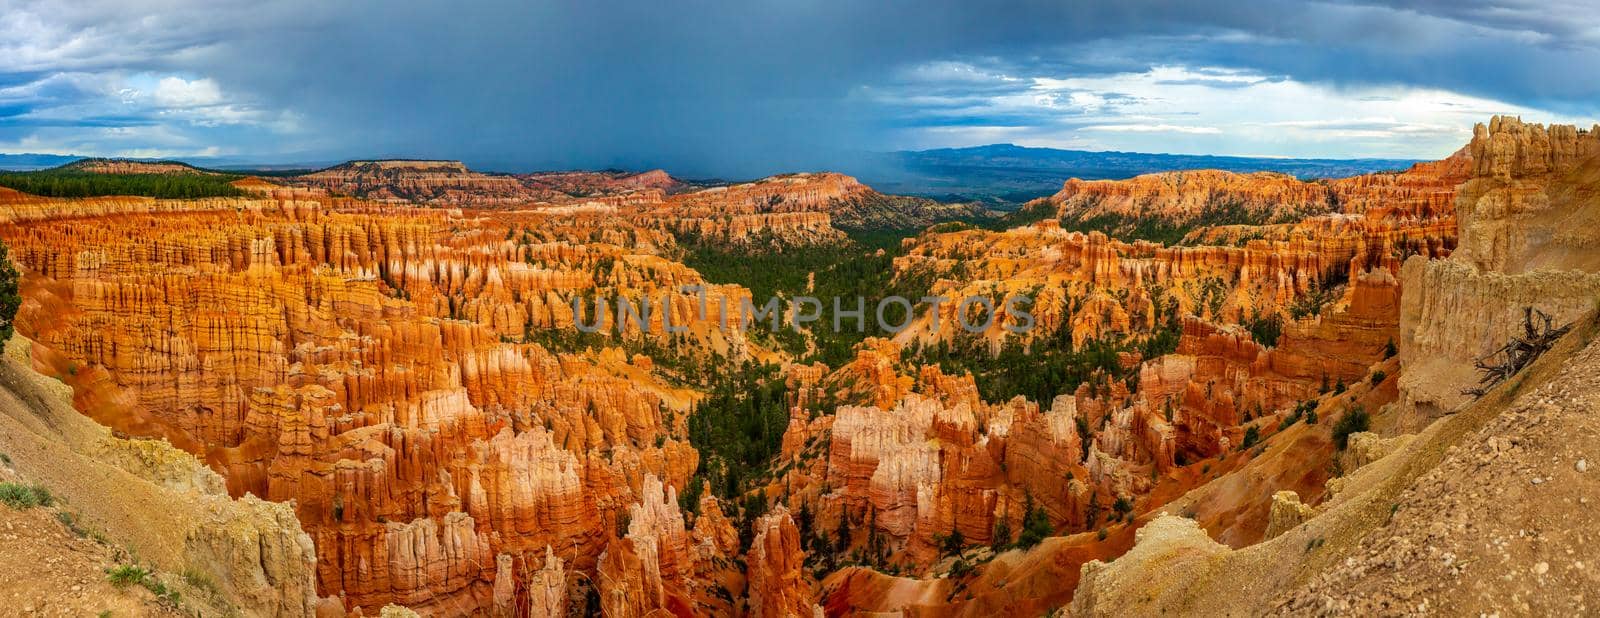 Bryce Amphitheater viewed from Inspiration Point, in Bryce Canyon National Park, Utah